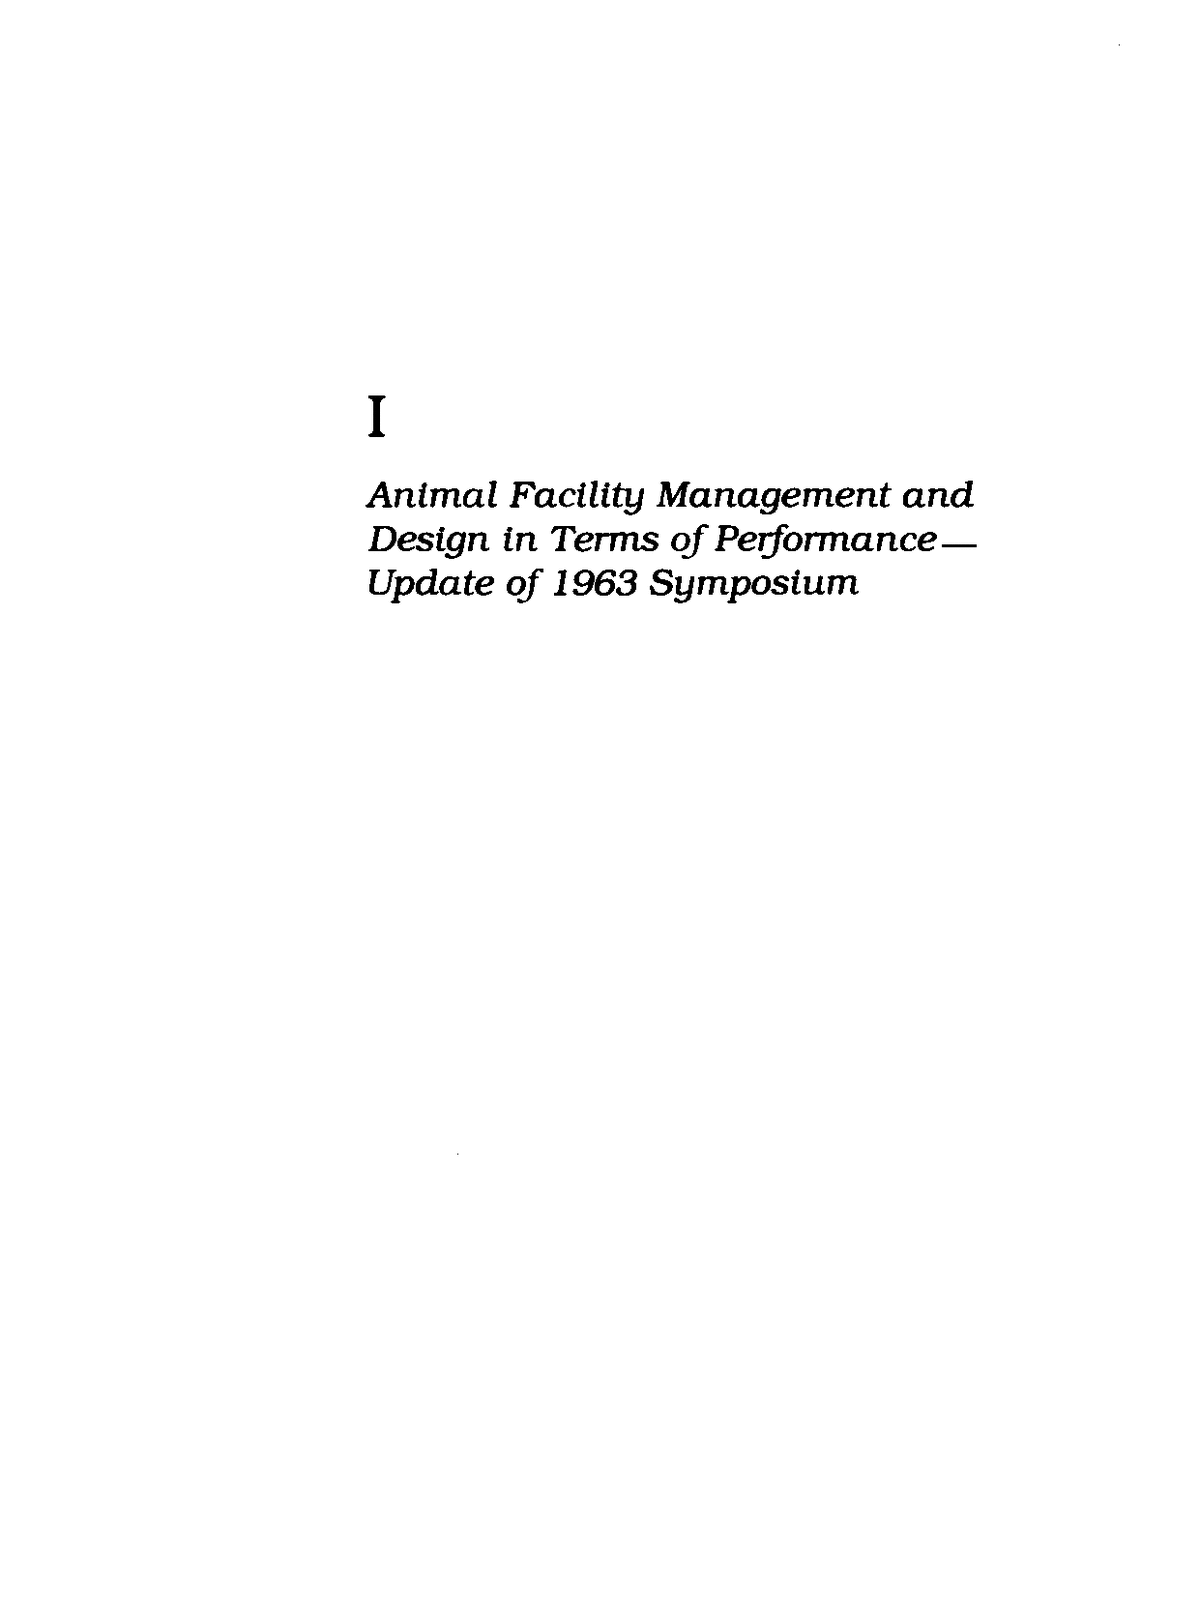 ANIMAL FACILITY MANAGEMENT AND DESIGN IN TERMS OF PERFORMANCE--UPDATE OF  1963 SYMPOSIUM | Laboratory Animal Housing |The National Academies Press